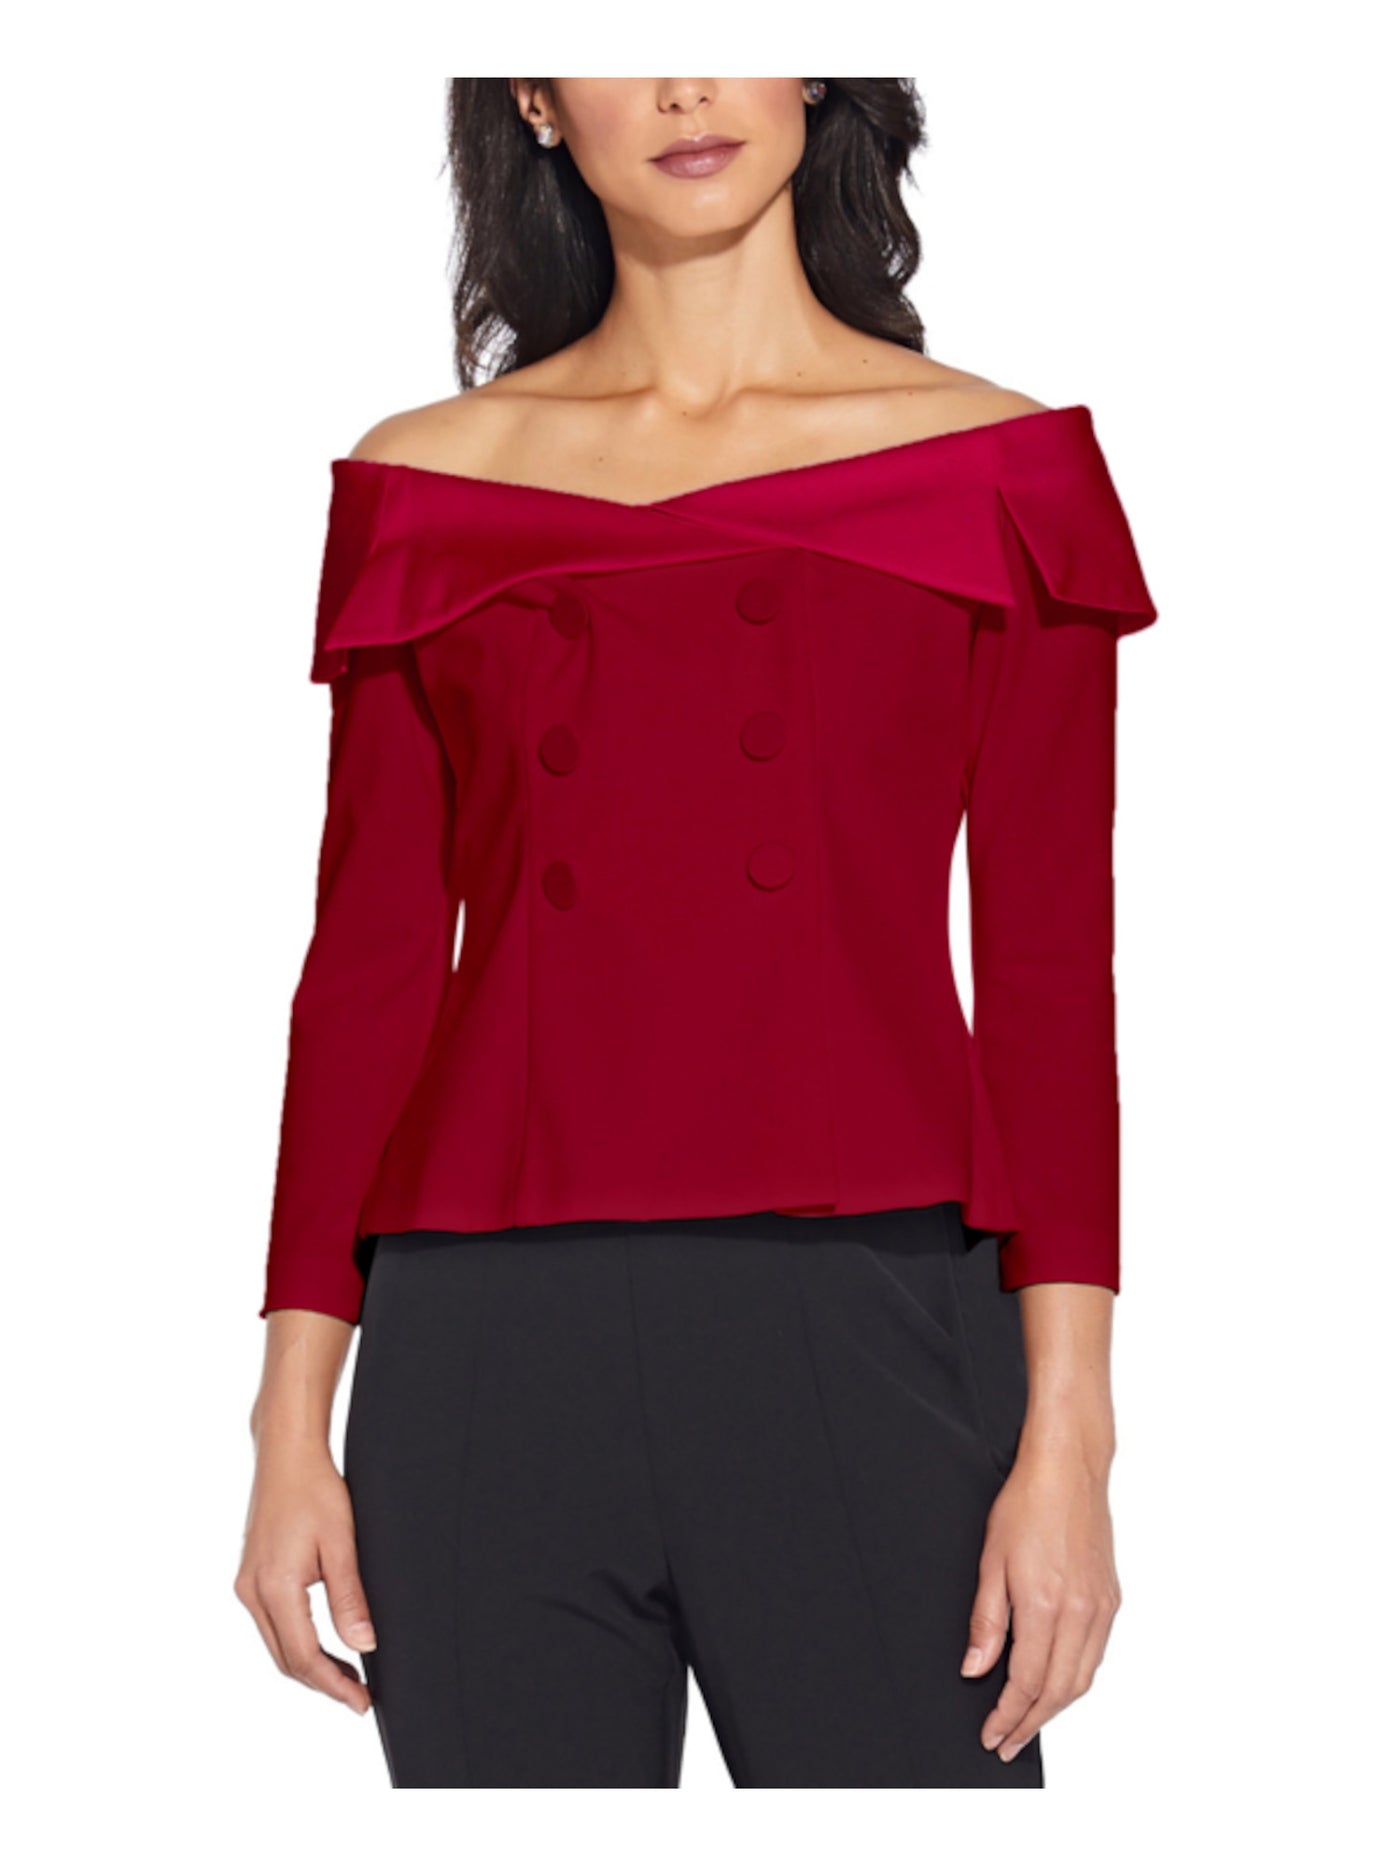 ADRIANNA PAPELL Womens Red 3/4 Sleeve Off Shoulder Wear To Work Top 6